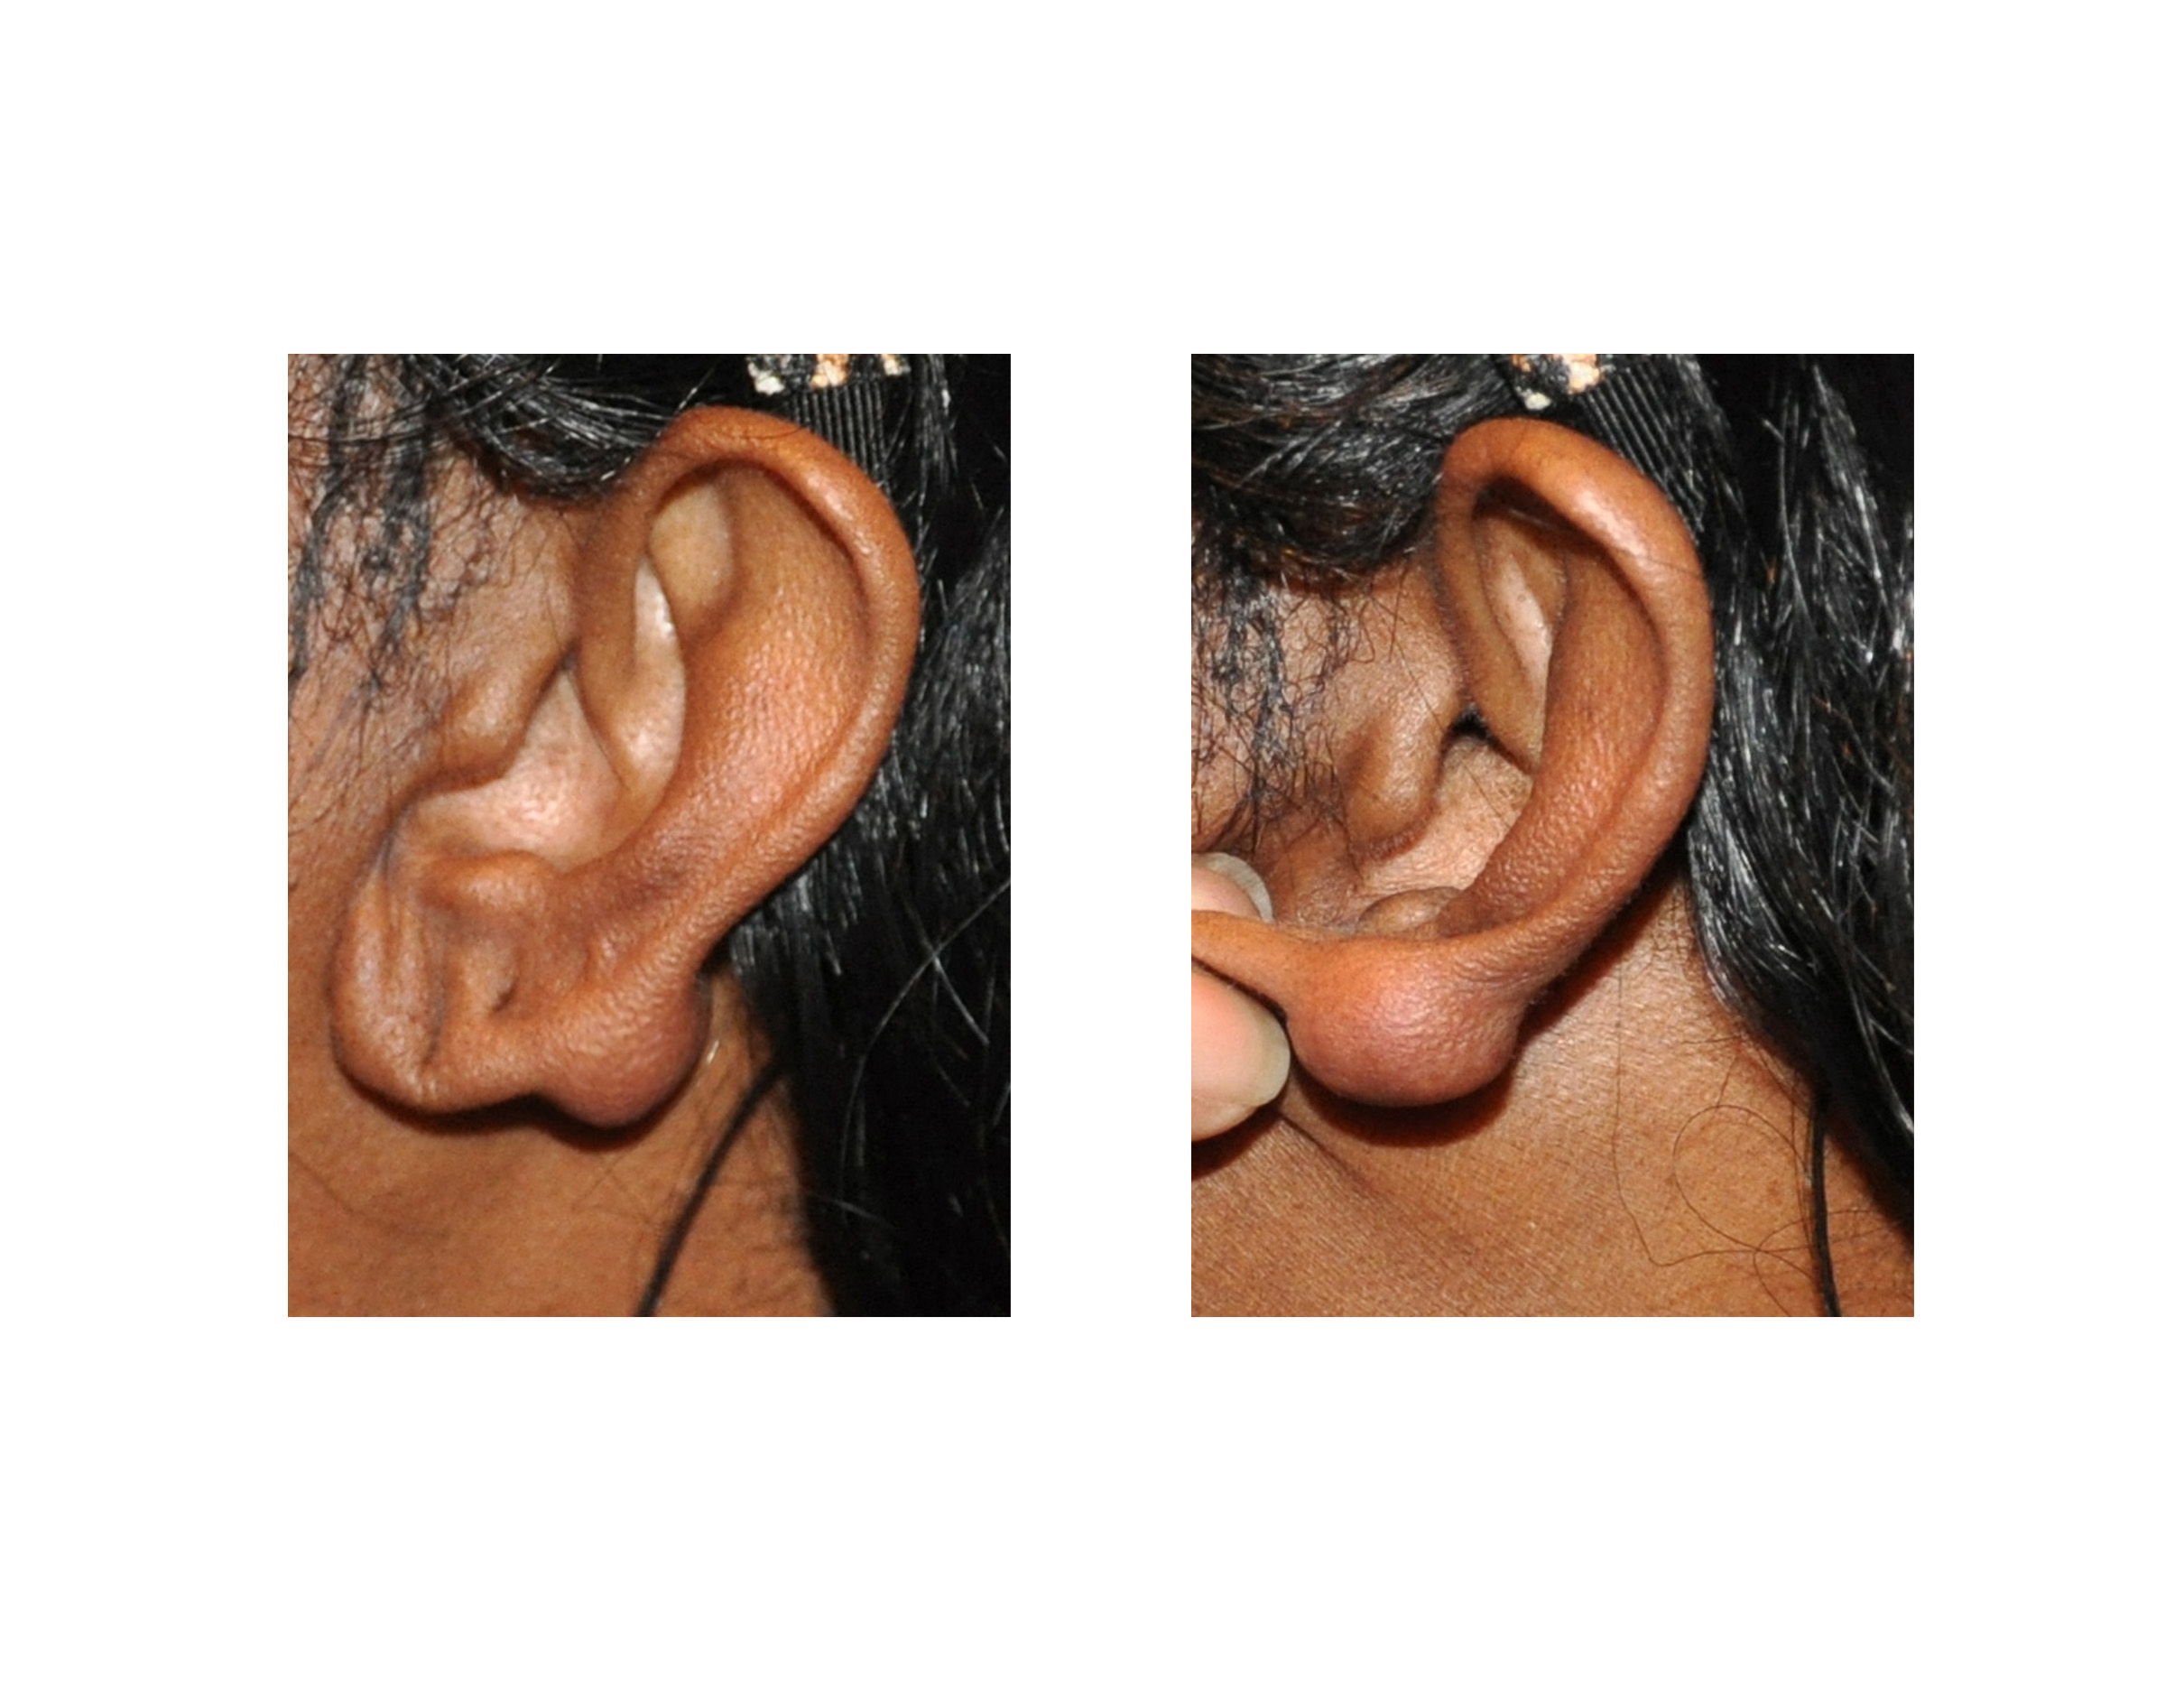 Keloid on Ear: Piercings, Other Causes, Treatment, Removal, Preve